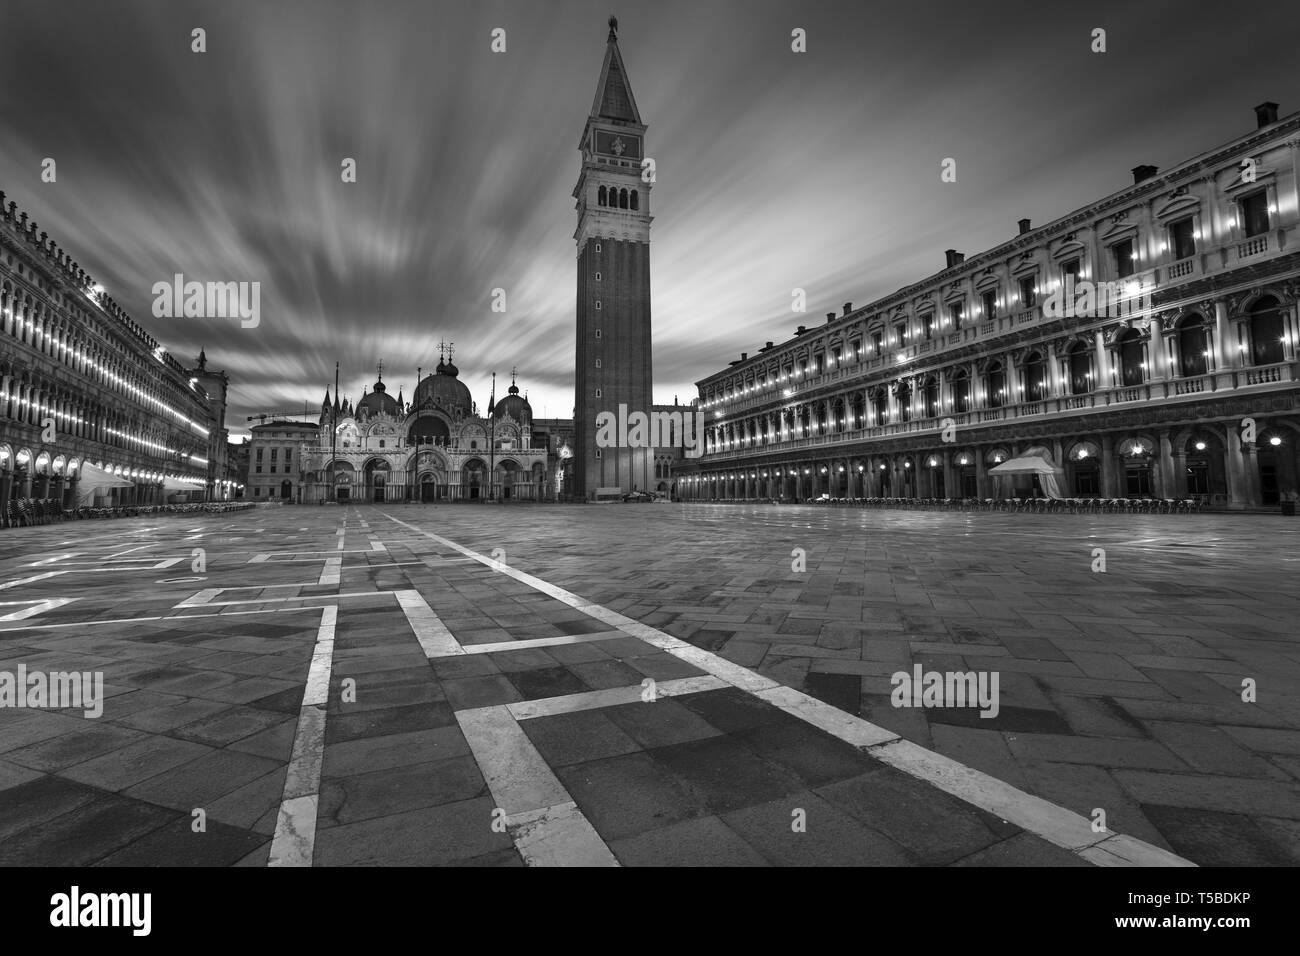 Venice, Italy. Cityscape image of St. Mark's square in Venice, Italy during sunrise. Stock Photo